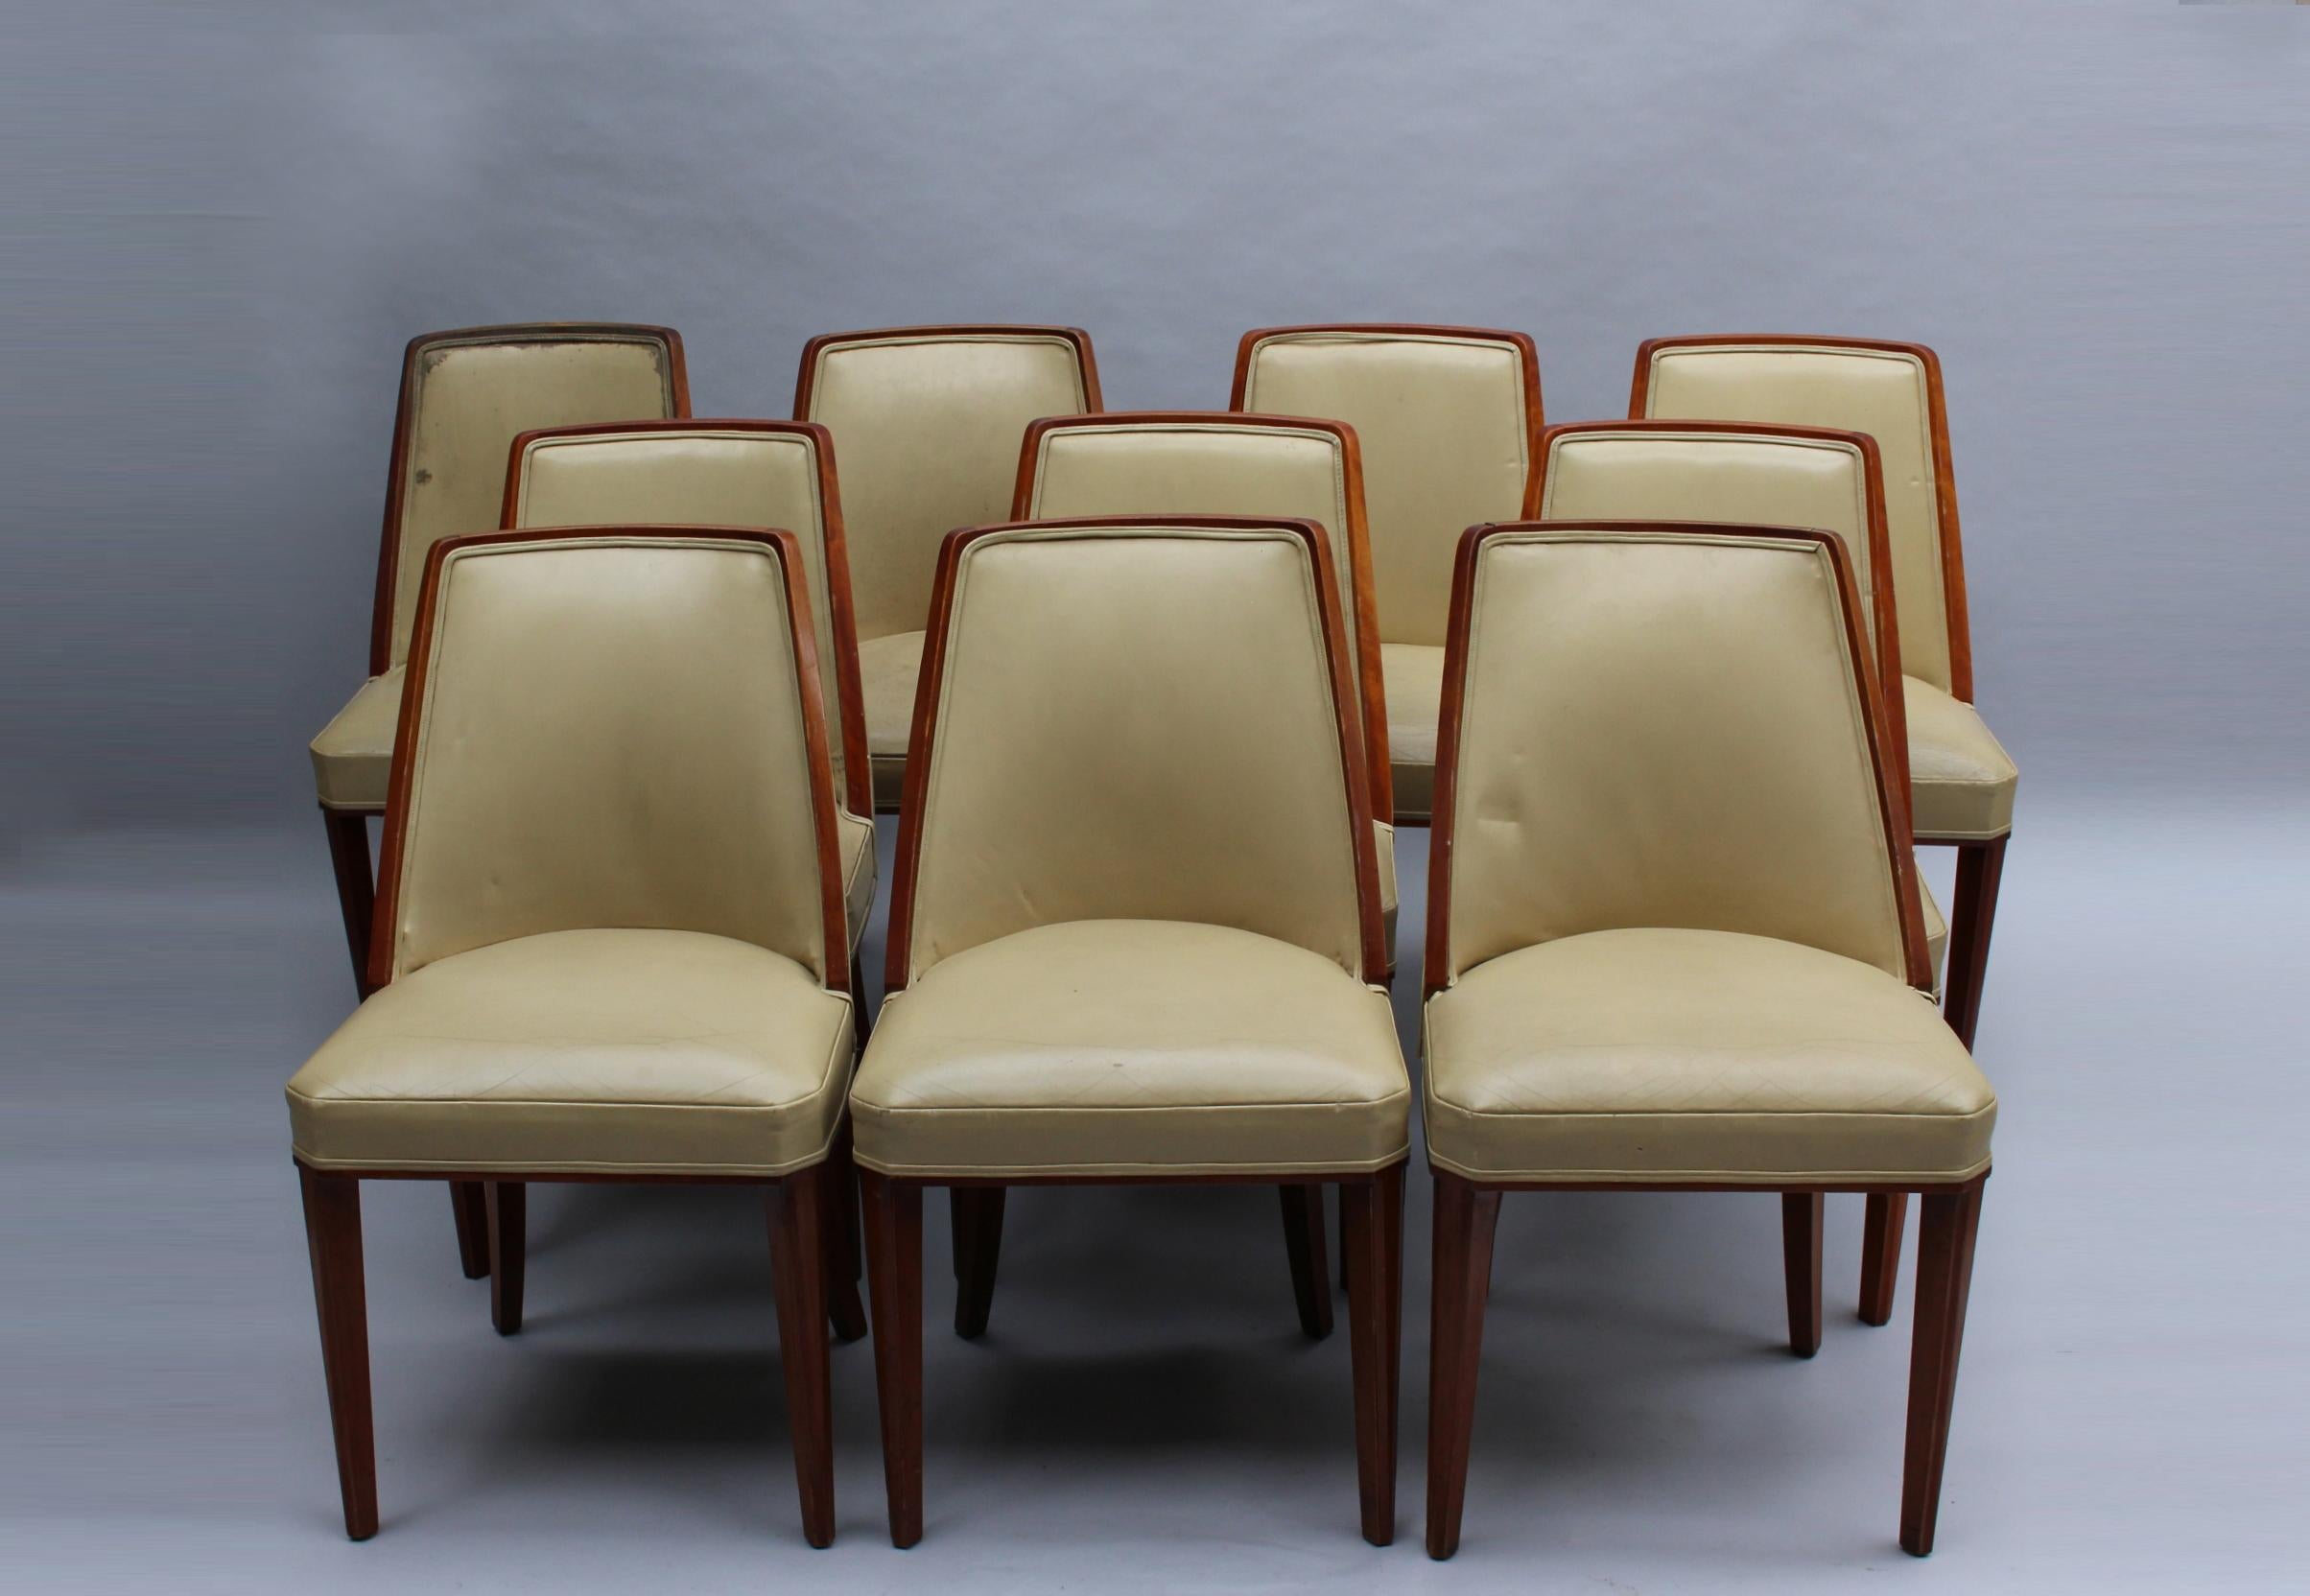 A set of ten fine French Art Deco mahogany dining chairs by Albert Guenot for 